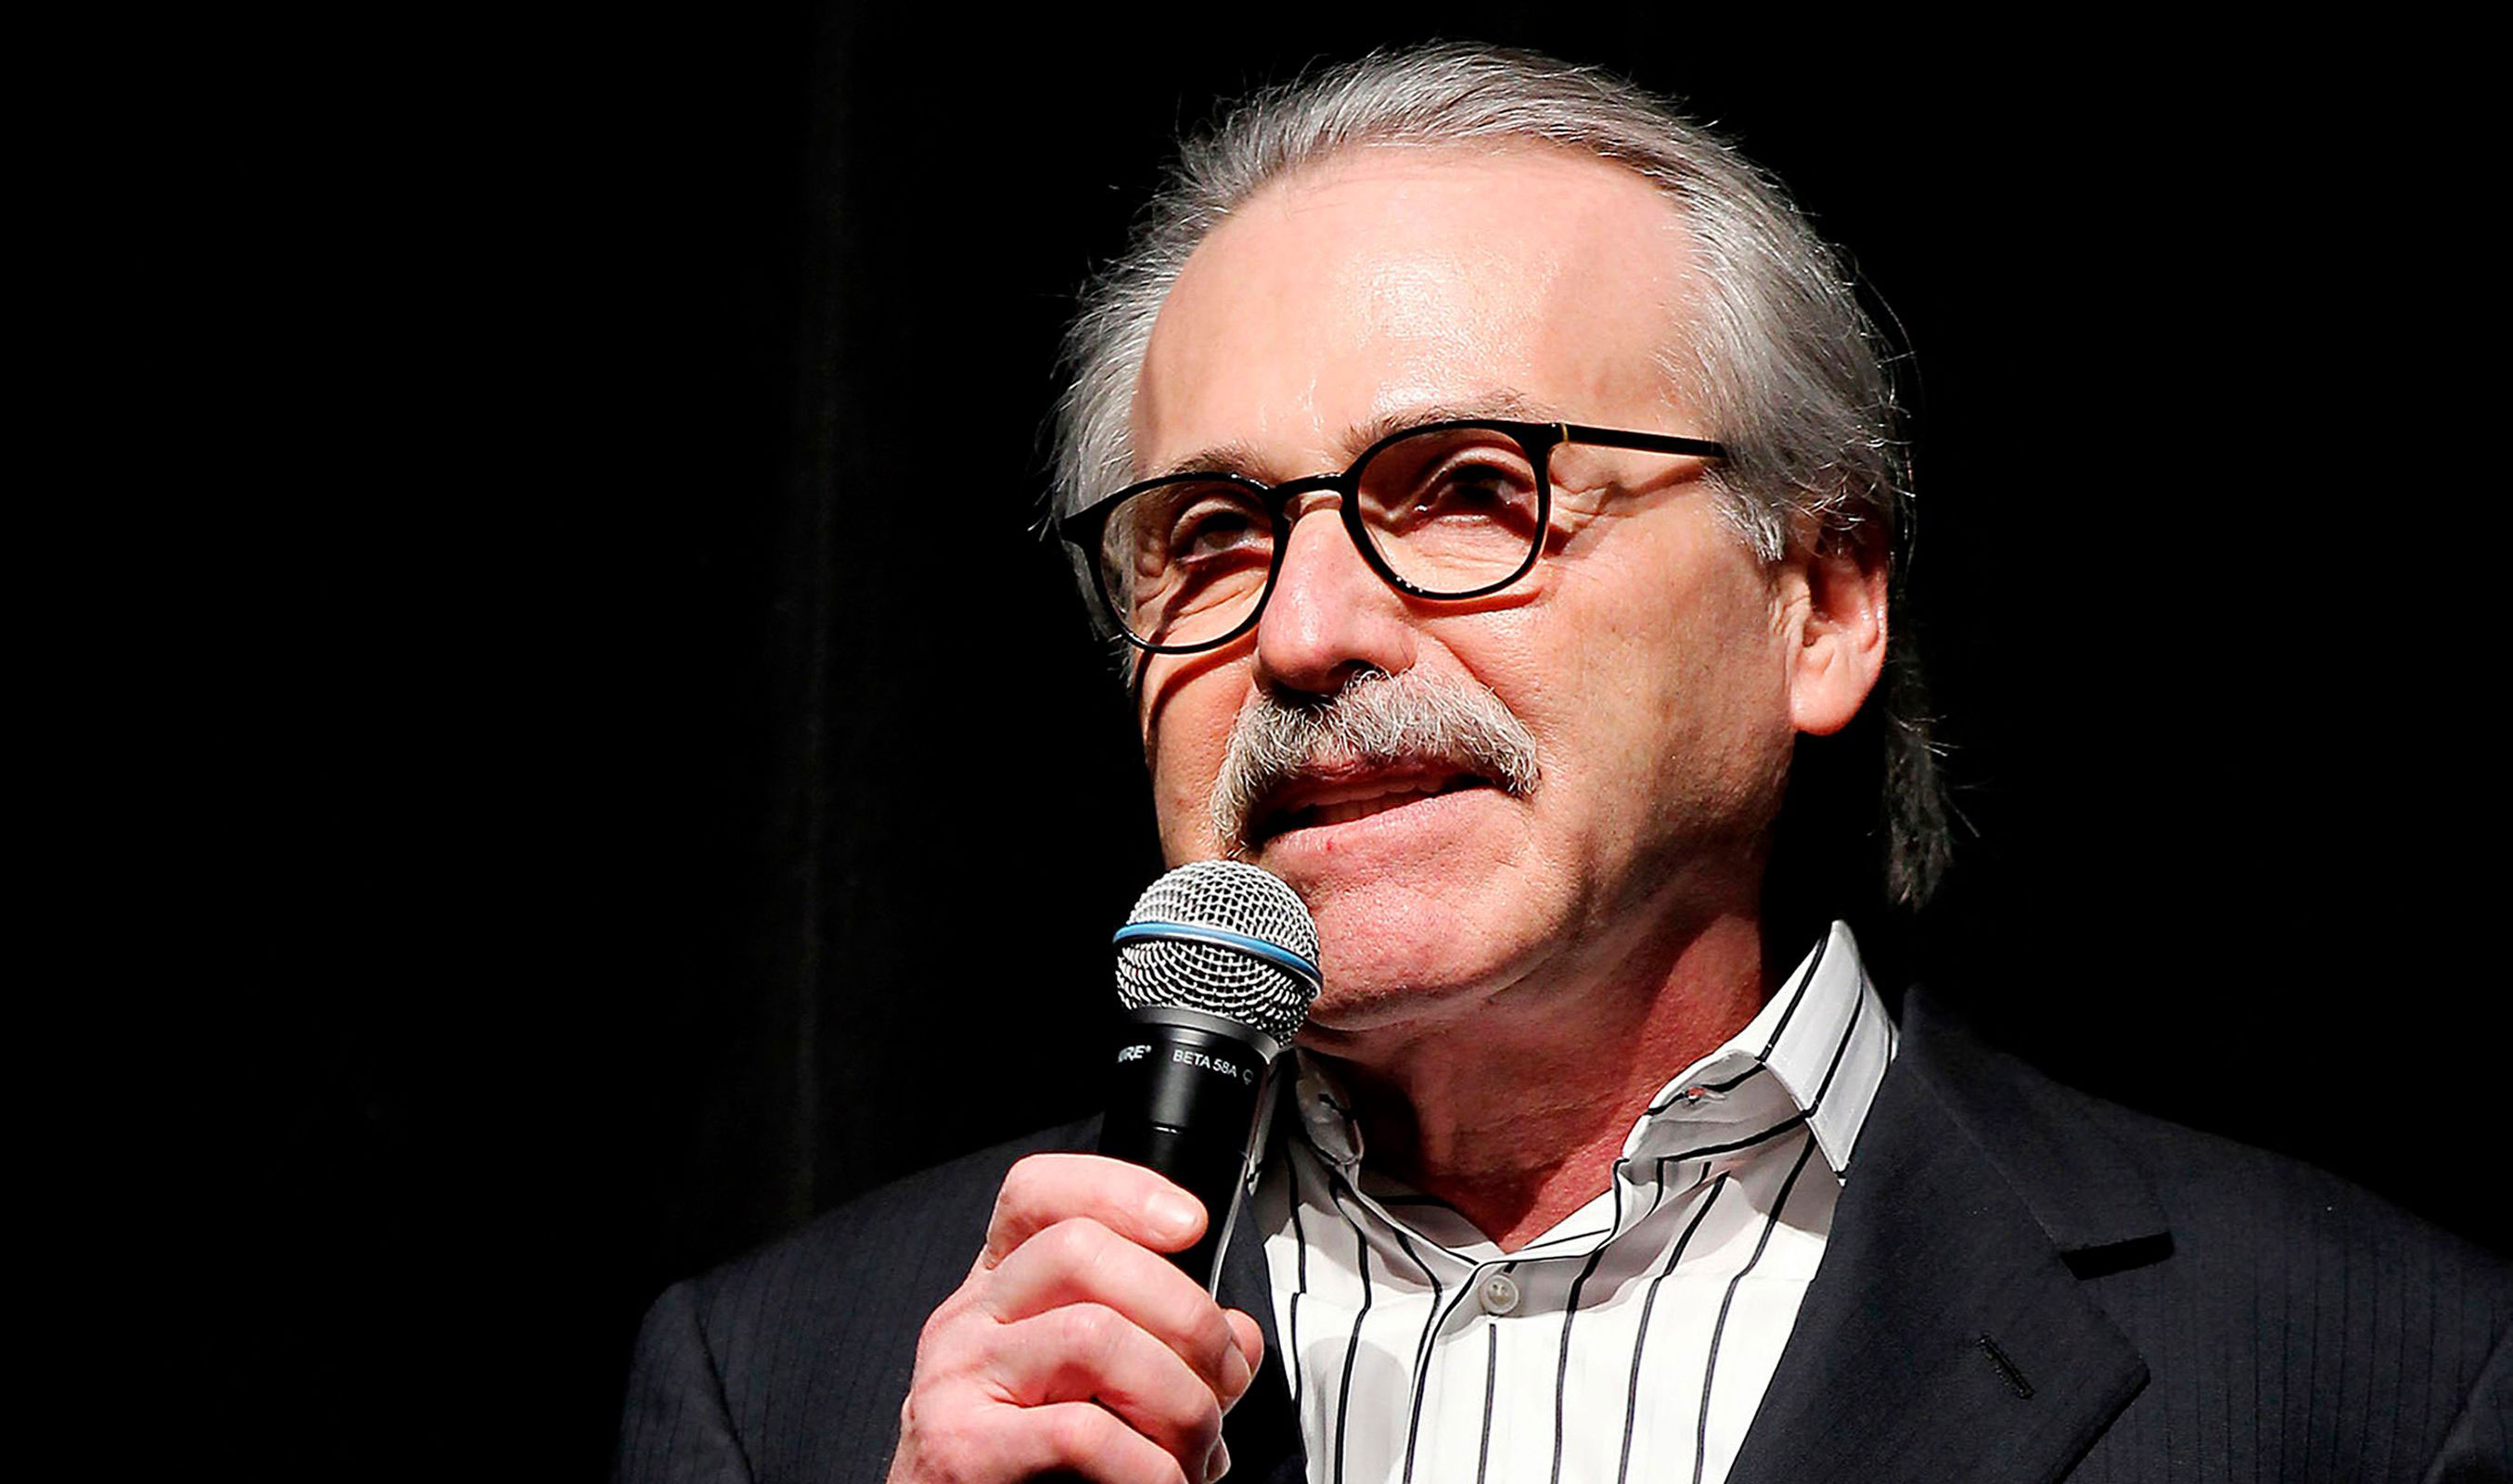 David Pecker addresses those attending the Shape & Men's Fitness Super Bowl Party in New York in 2014. 